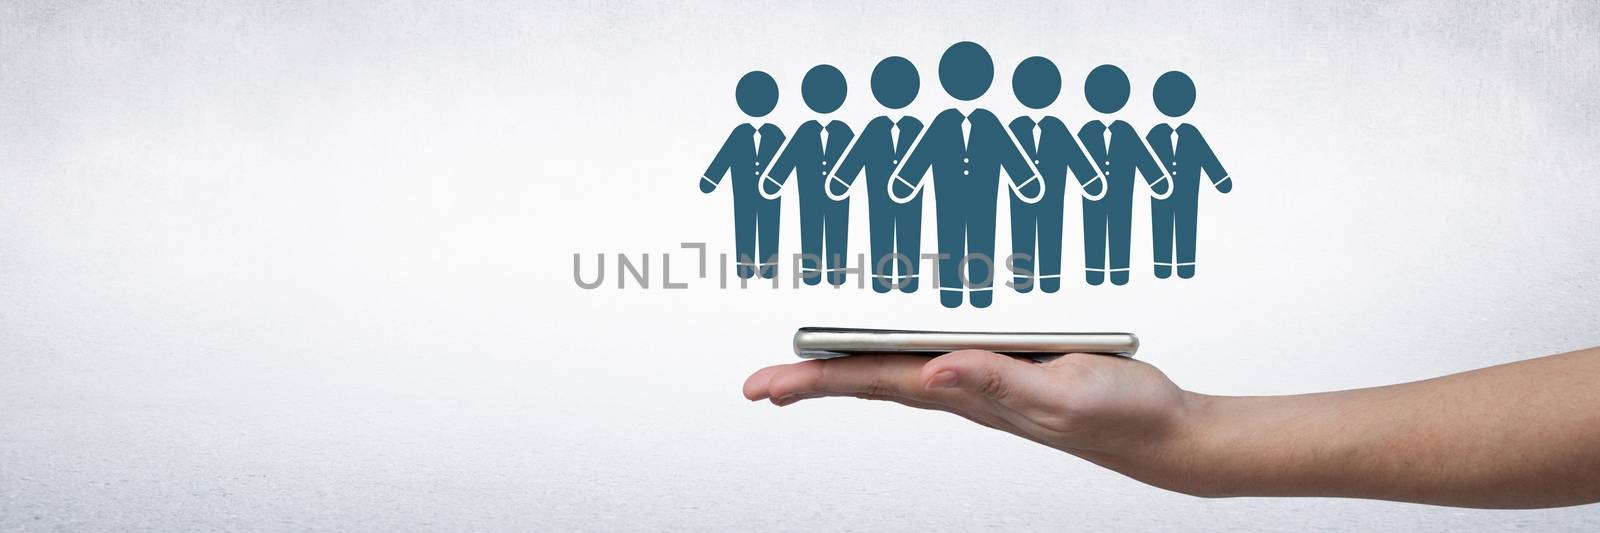 Hand holding tablet with business people group icon by Wavebreakmedia